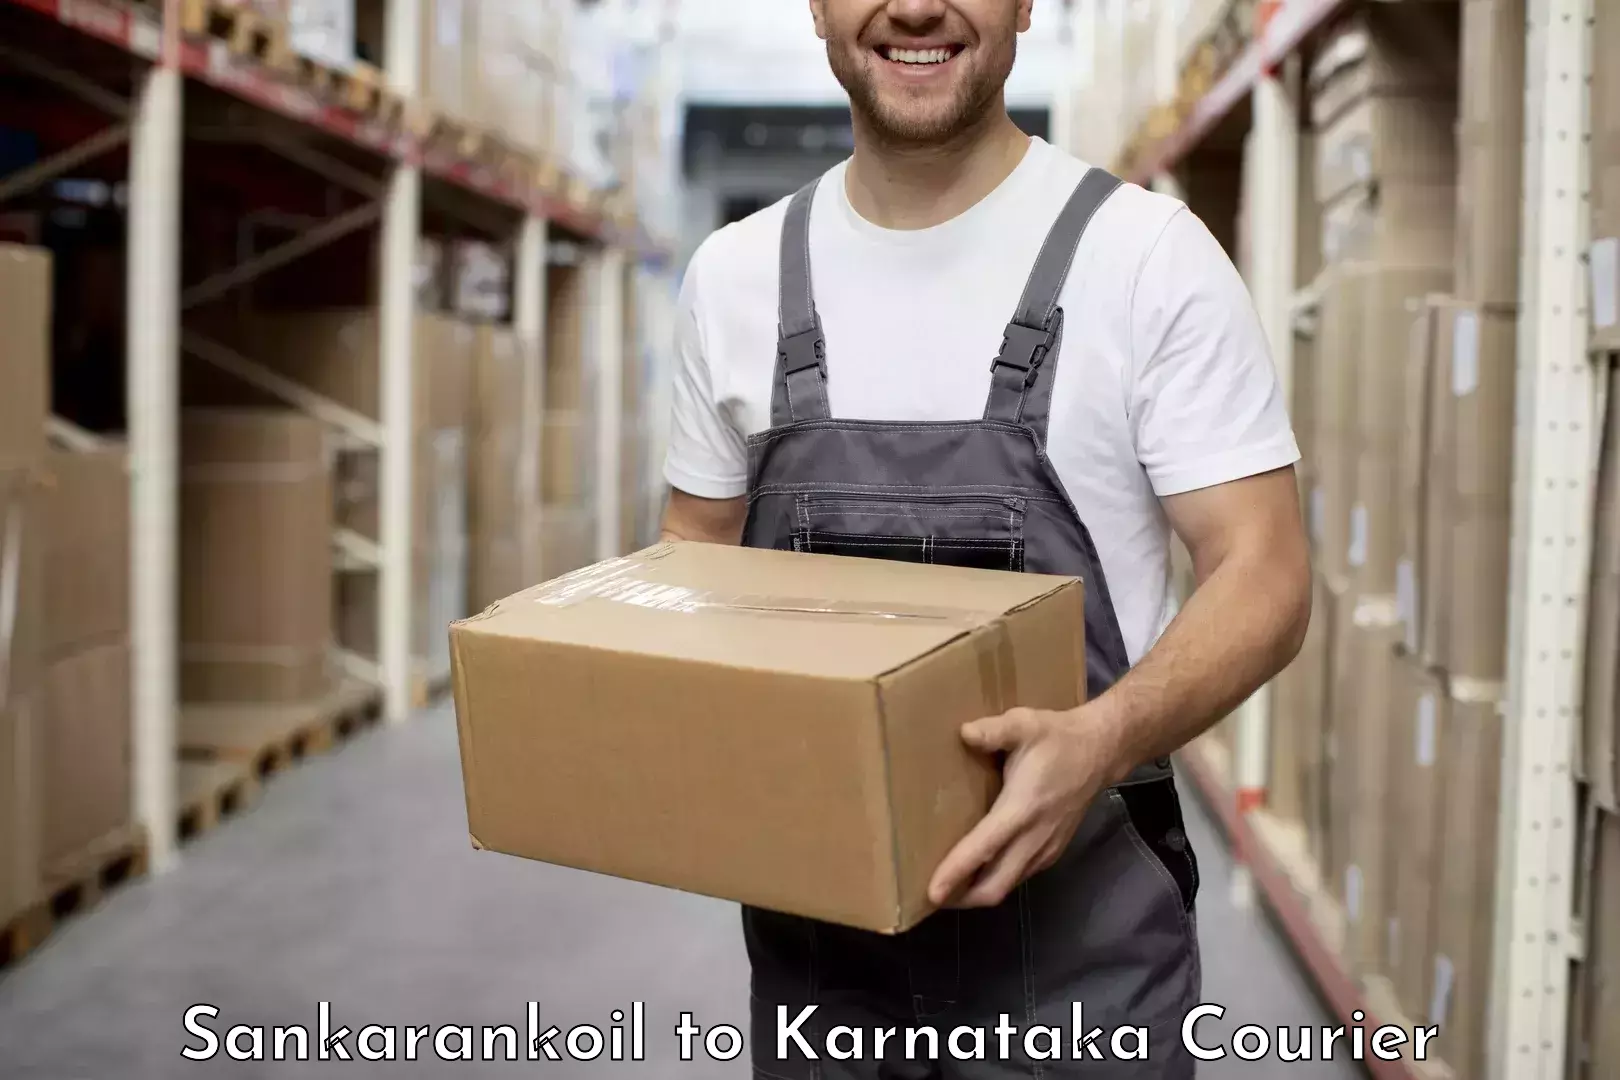 Specialized shipment handling Sankarankoil to Manipal Academy of Higher Education